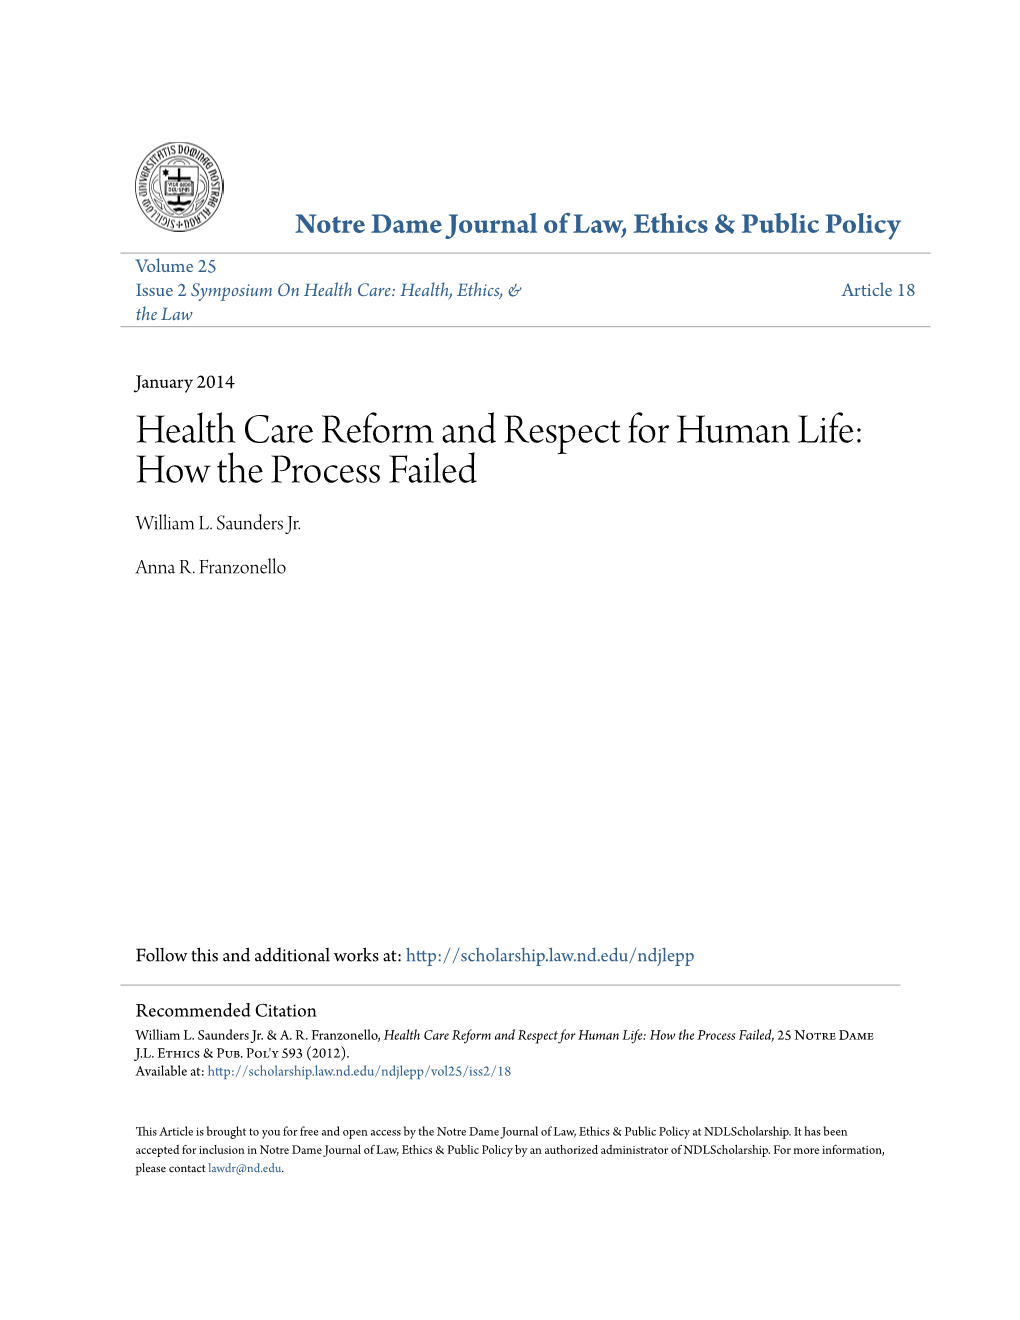 Health Care Reform and Respect for Human Life: How the Process Failed William L